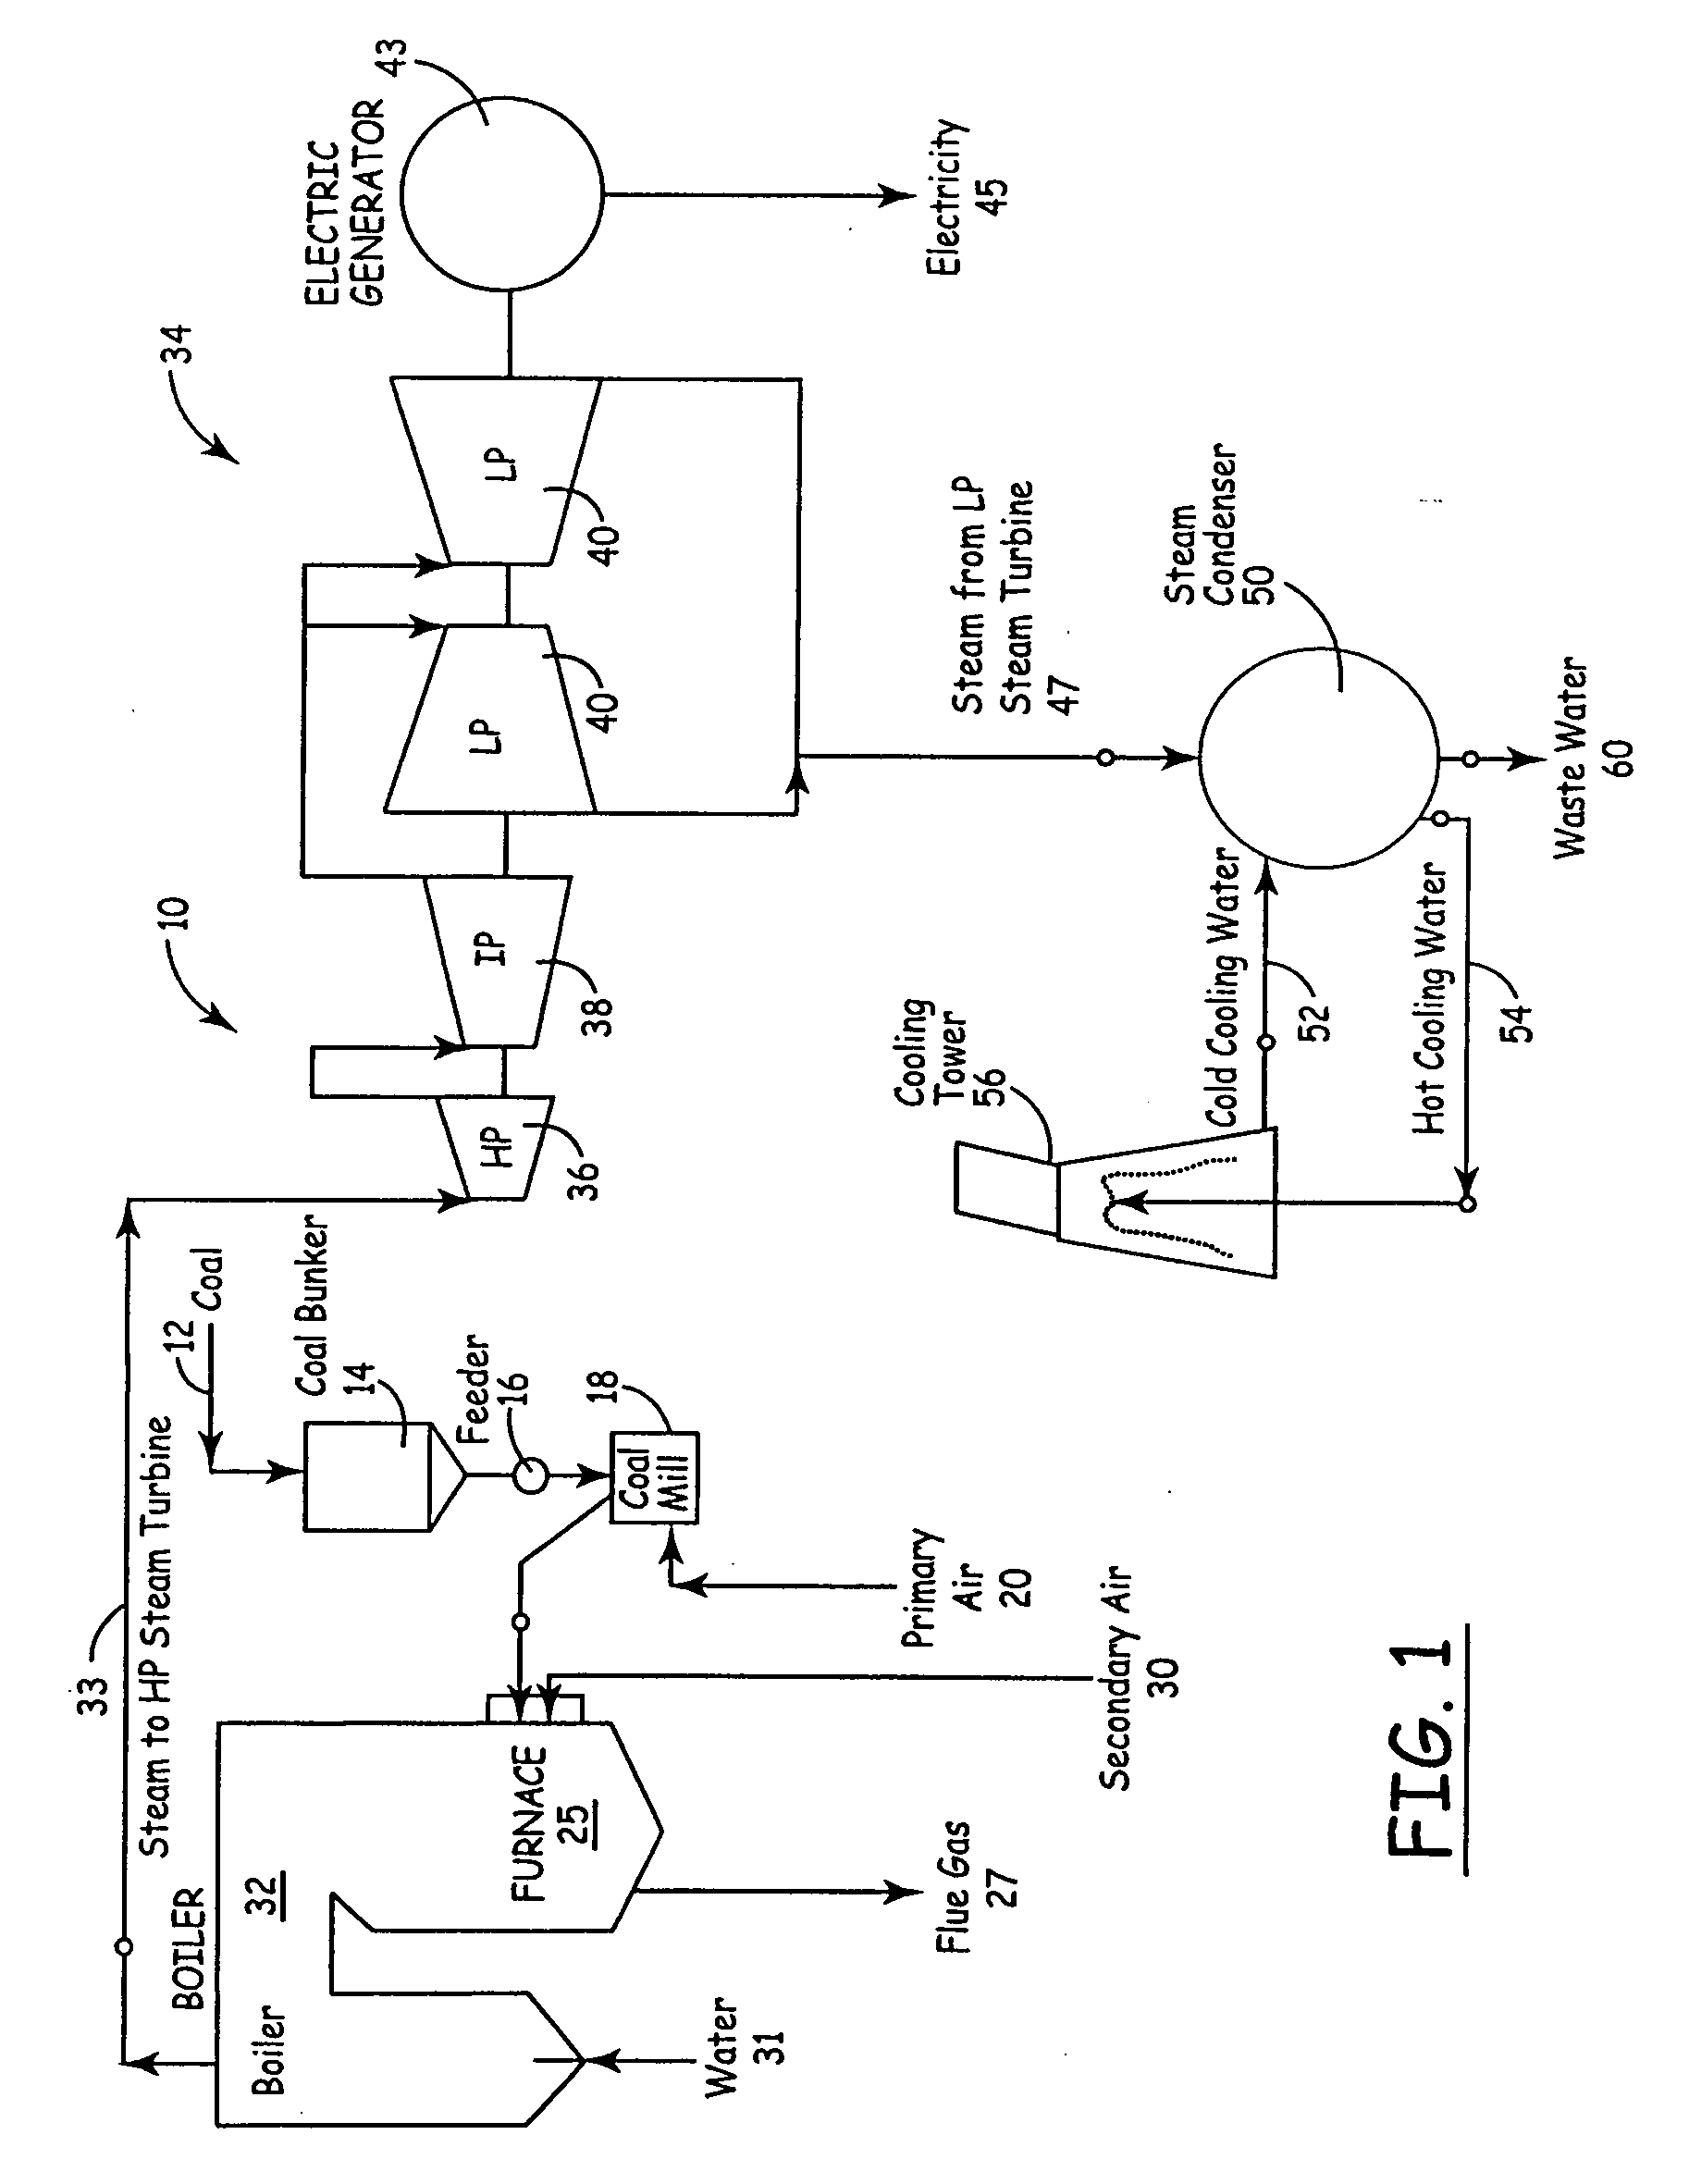 Apparatus and method of enhancing the quality of high-moisture materials and separating and concentrating organic and/or non-organic material contained therein